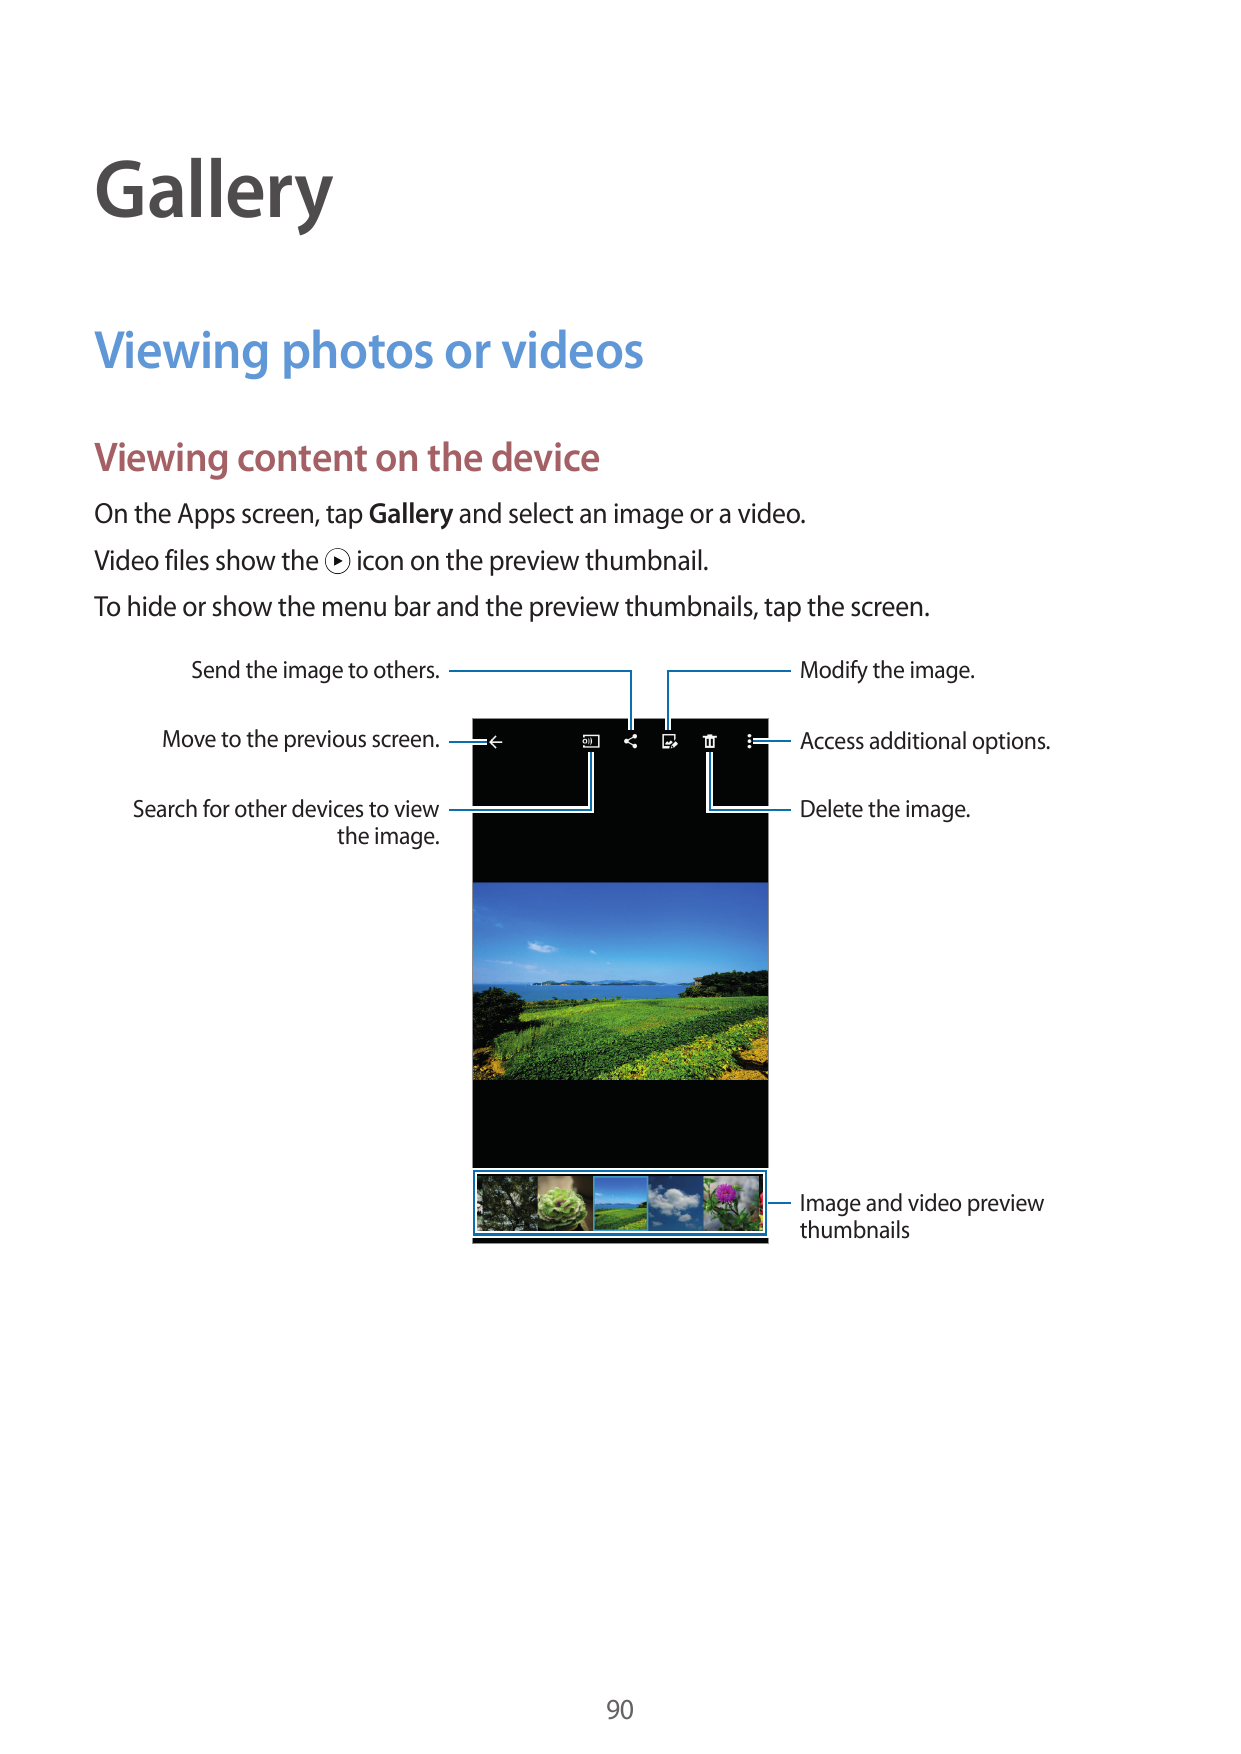 GalleryViewing photos or videosViewing content on the deviceOn the Apps screen, tap Gallery and select an image or a video.Video